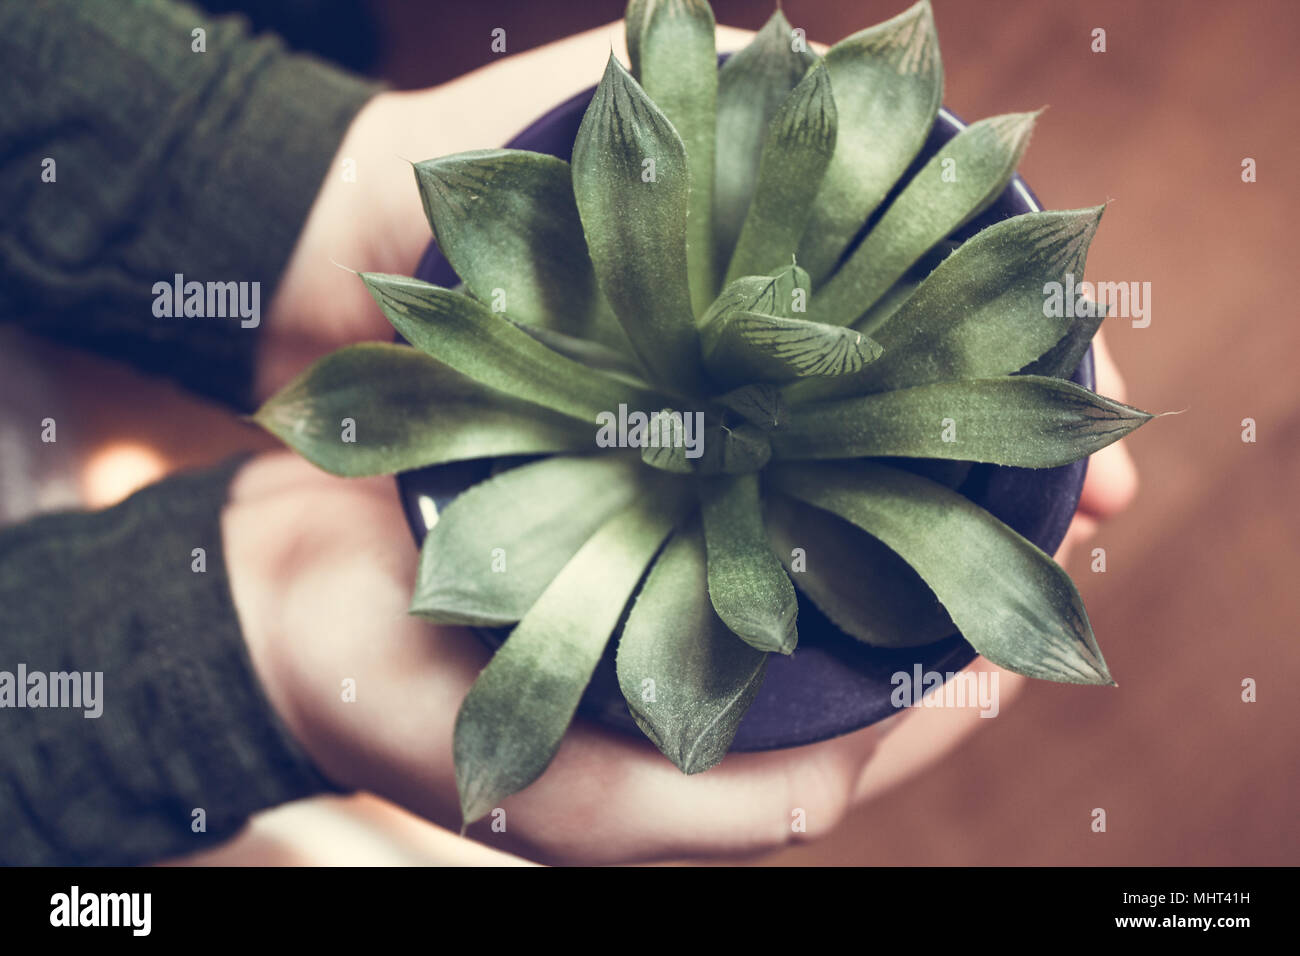 Succulent plant being hold by a teenage girl, hands close up Stock Photo